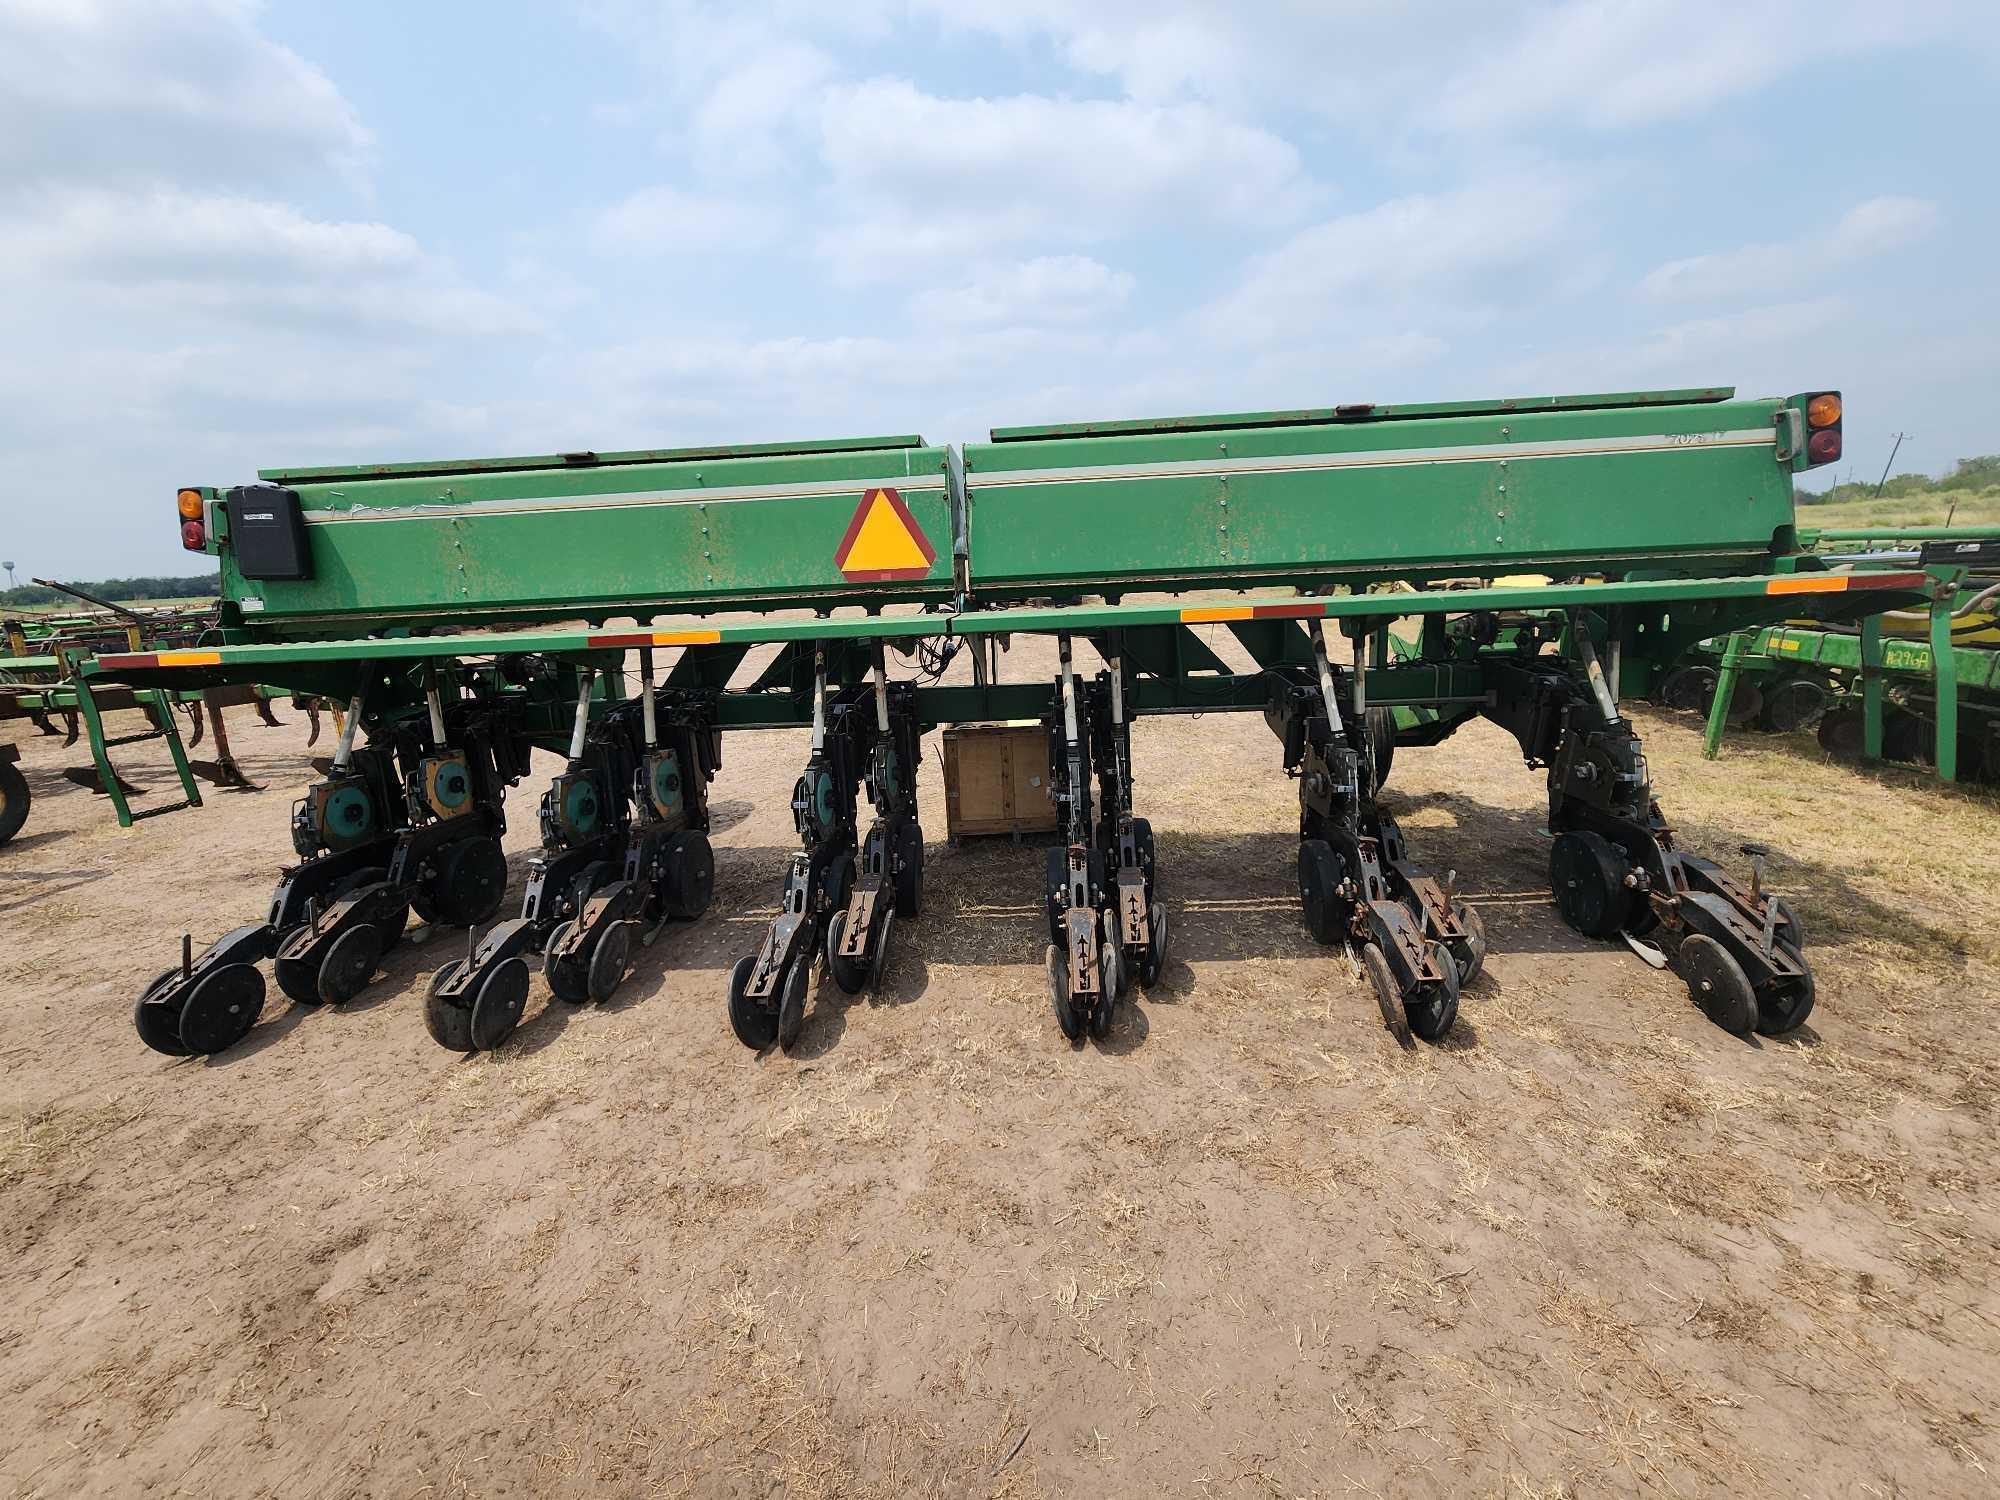 Great Plains 2025P 6-Row Double Grain Drill, Wooden Crate w/Misc. Items